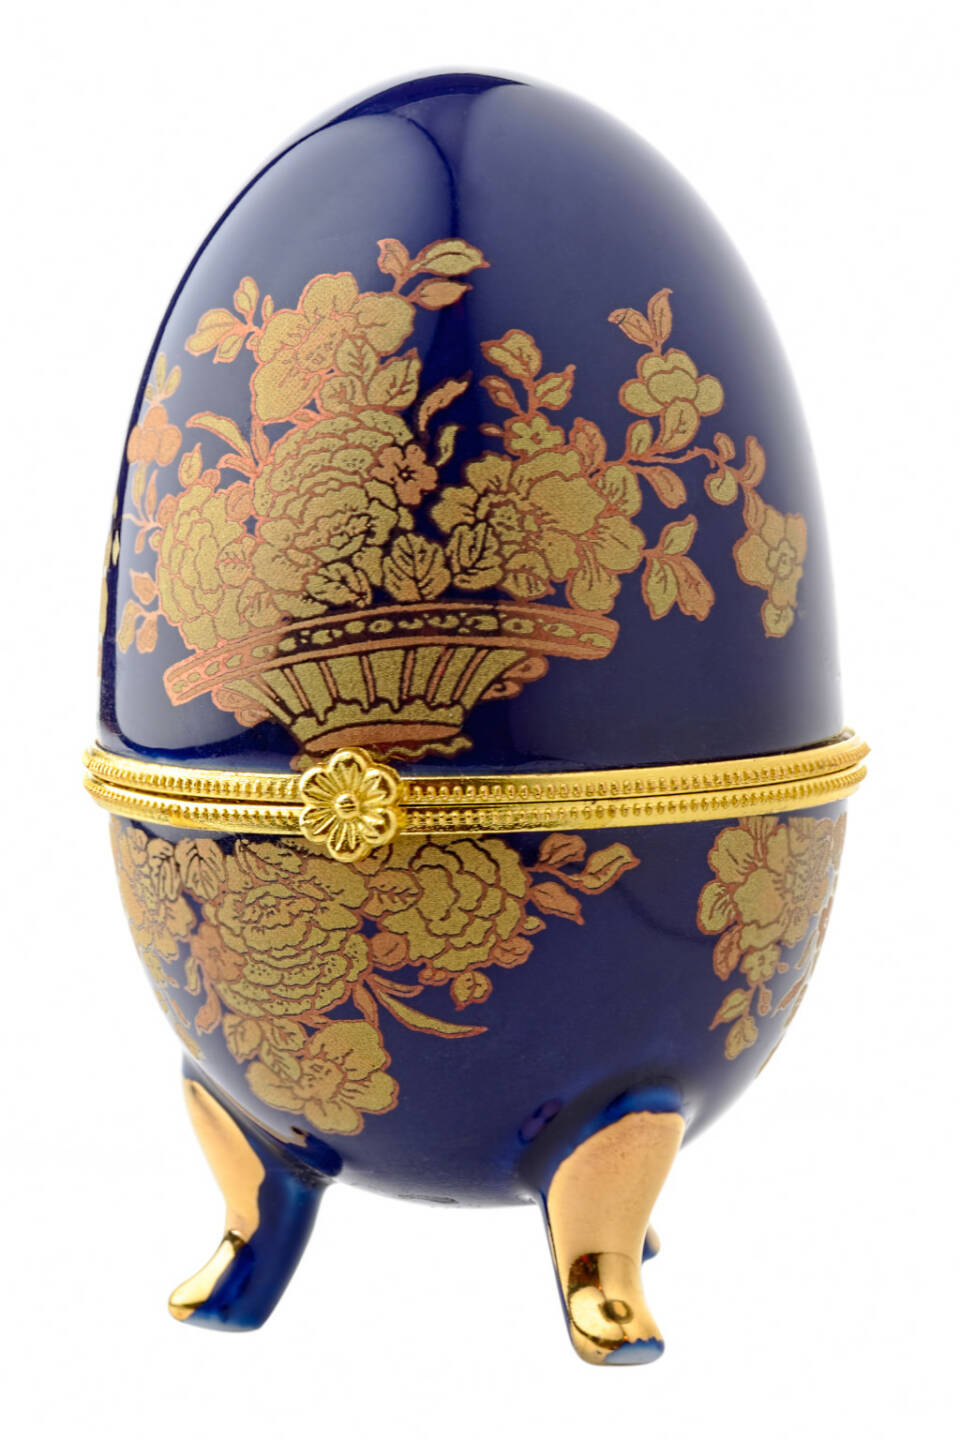 Faberge, Fabergé Ei, Osterei - http://www.shutterstock.com/de/pic-89056492/stock-photo-decorative-ceramic-easter-egg-for-jewellery-faberge-egg-against-white-background.html